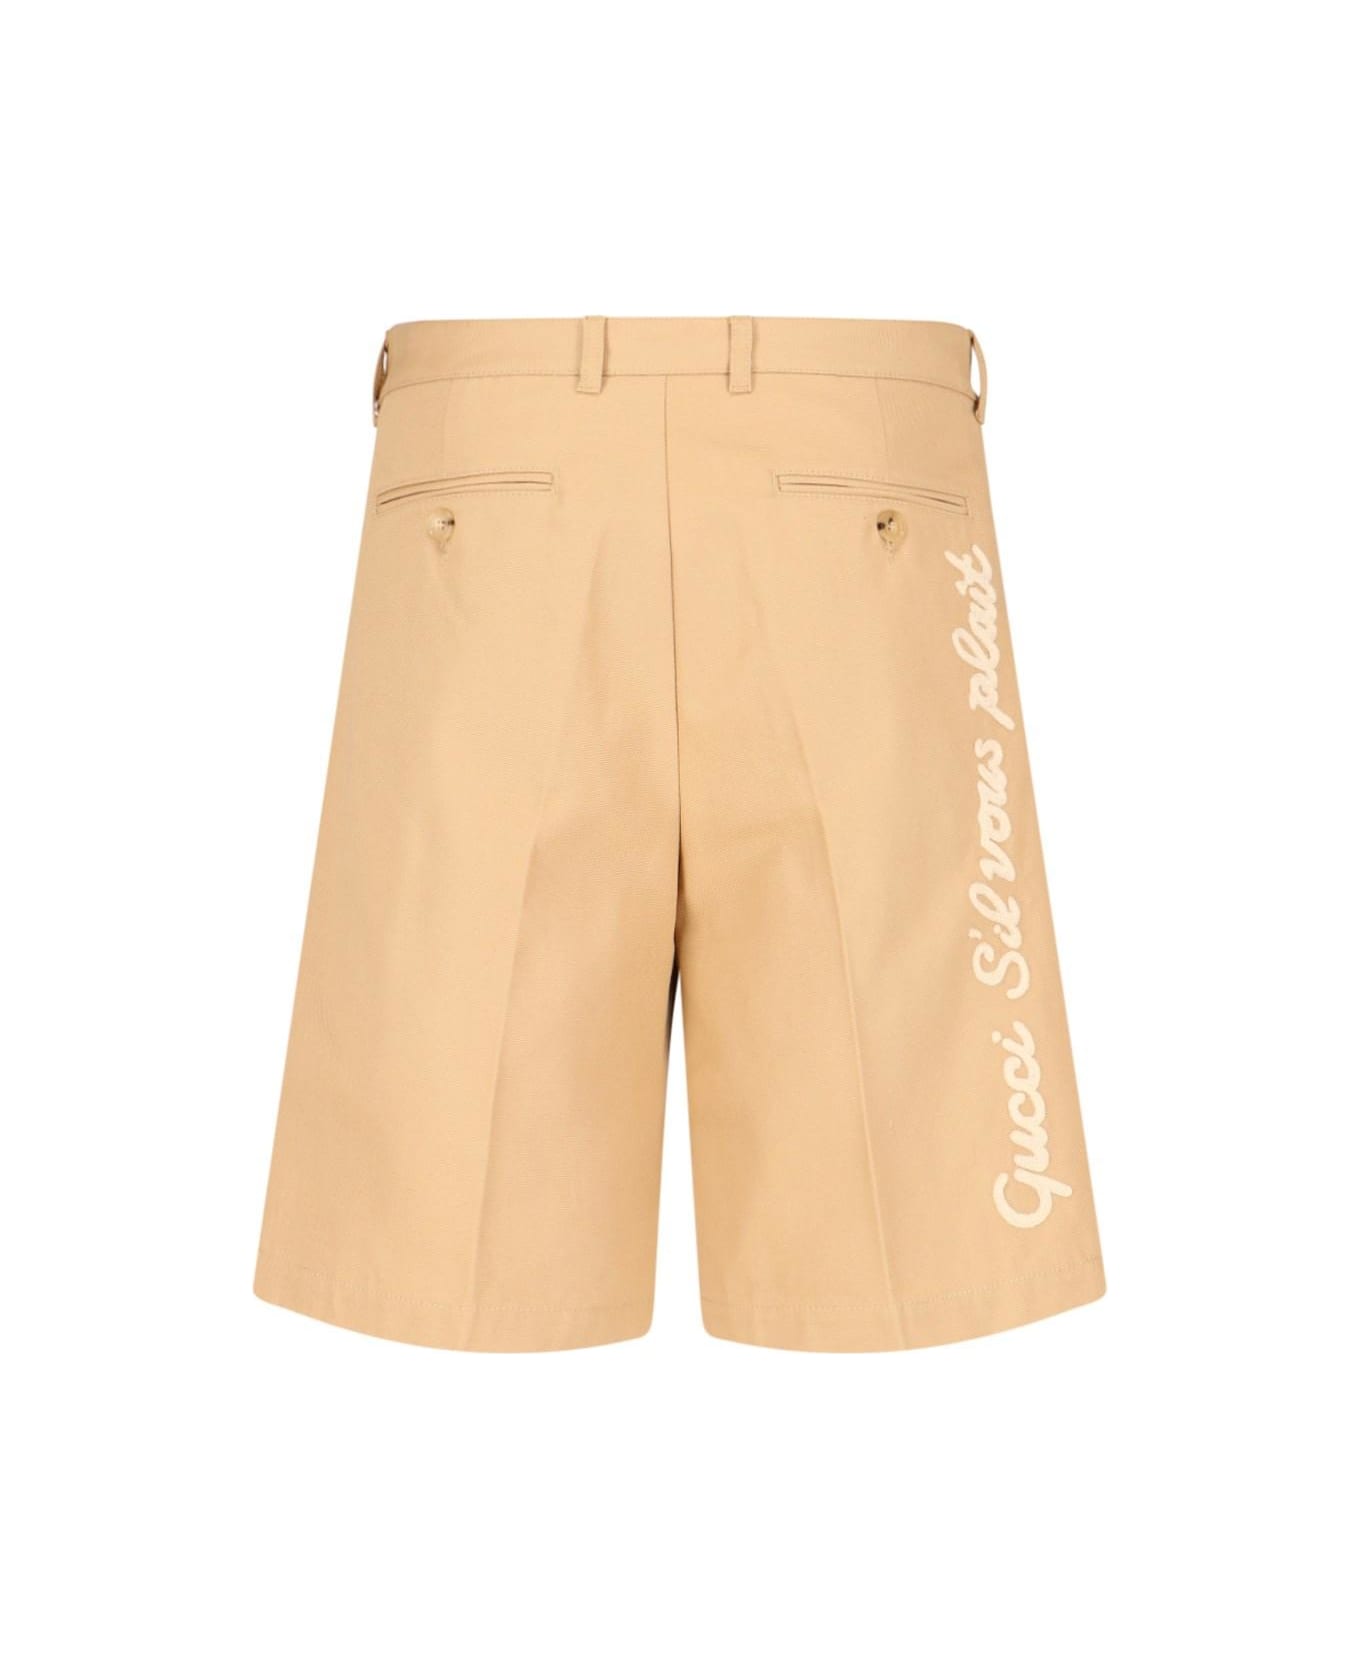 Gucci Back Embroidered Shorts - Beige ボトムス